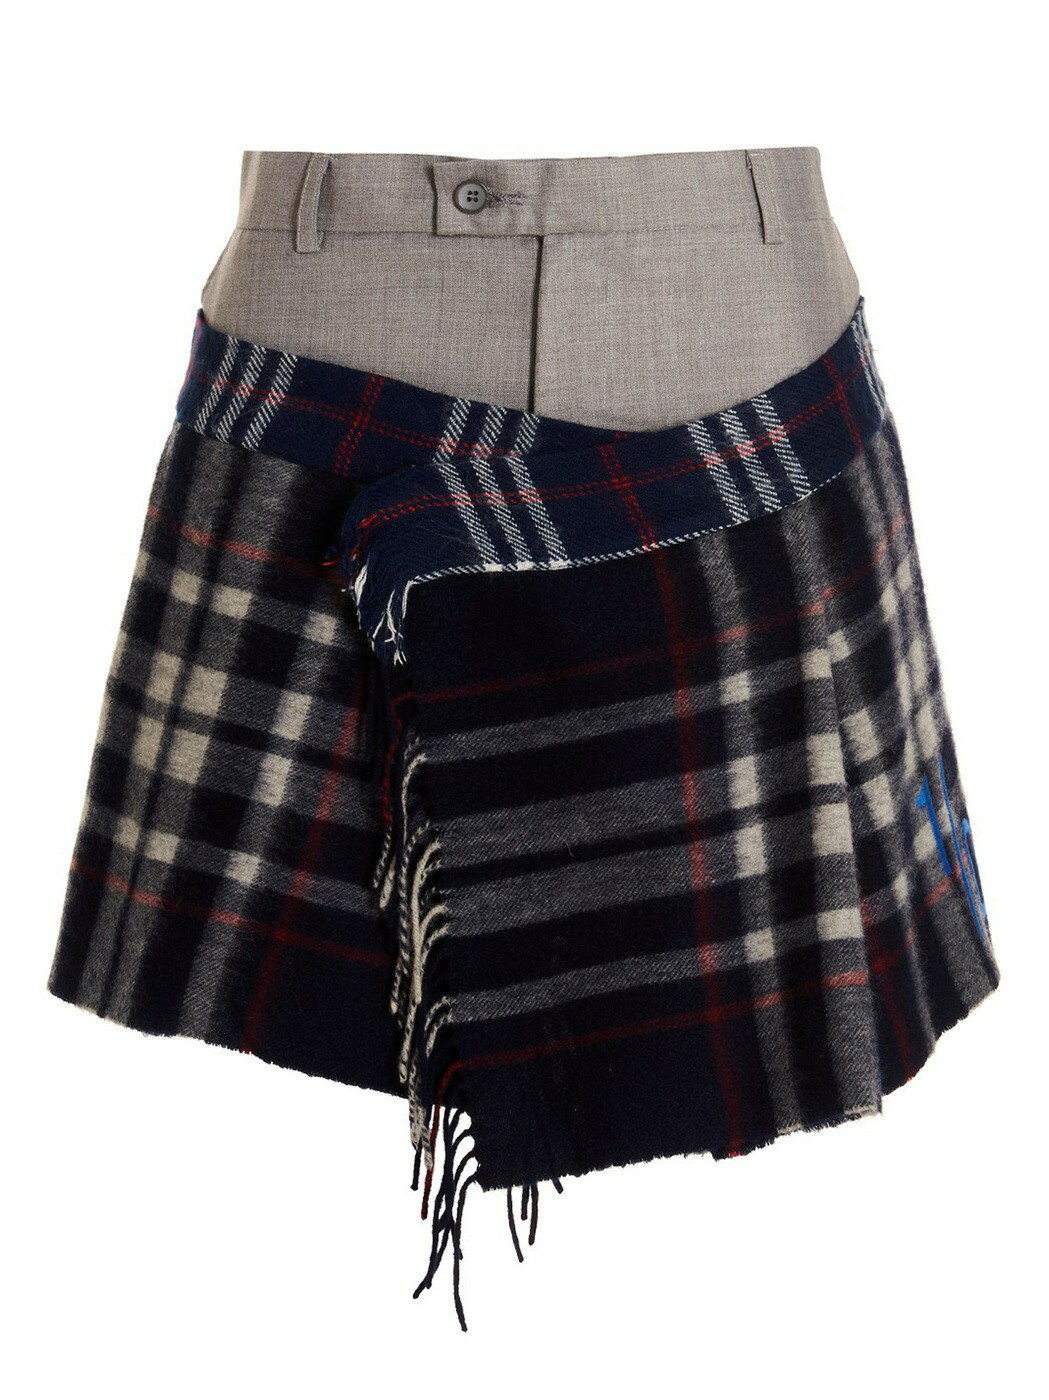 1/OFF ޥ顼 Multicolor 'Check Scarf Reworked' skirt  ǥ 2022 22142192 ڴǡ̵ۡڥåԥ̵ ju